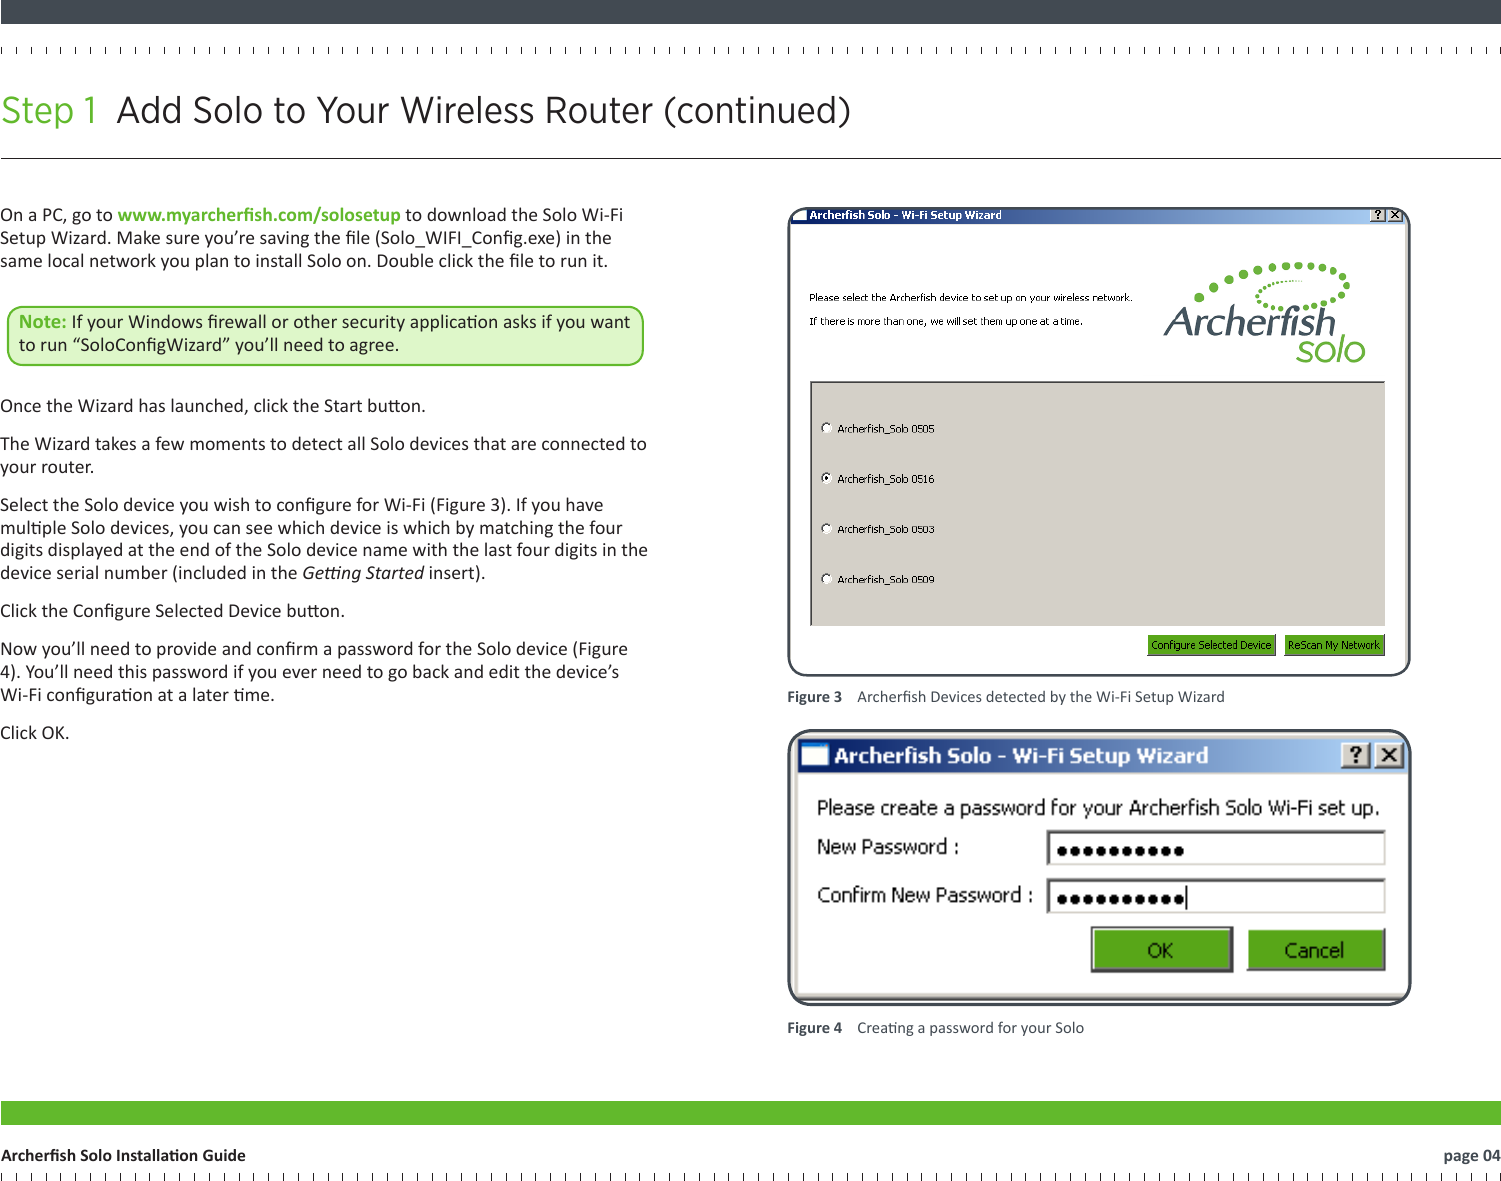 Step 1  Add Solo to Your Wireless Router (continued)   page 04Archersh Solo Installaon GuideFigure 3    Archersh Devices detected by the Wi-Fi Setup WizardFigure 4    Creang a password for your SoloOn a PC, go to www.myarchersh.com/solosetup to download the Solo Wi-Fi Setup Wizard. Make sure you’re saving the le (Solo_WIFI_Cong.exe) in the same local network you plan to install Solo on. Double click the le to run it. Note: If your Windows rewall or other security applicaon asks if you want to run “SoloCongWizard” you’ll need to agree.  Once the Wizard has launched, click the Start buon.The Wizard takes a few moments to detect all Solo devices that are connected to your router.Select the Solo device you wish to congure for Wi-Fi (Figure 3). If you have mulple Solo devices, you can see which device is which by matching the four digits displayed at the end of the Solo device name with the last four digits in the device serial number (included in the Geng Started insert).Click the Congure Selected Device buon.Now you’ll need to provide and conrm a password for the Solo device (Figure 4). You’ll need this password if you ever need to go back and edit the device’s Wi-Fi conguraon at a later me.Click OK.